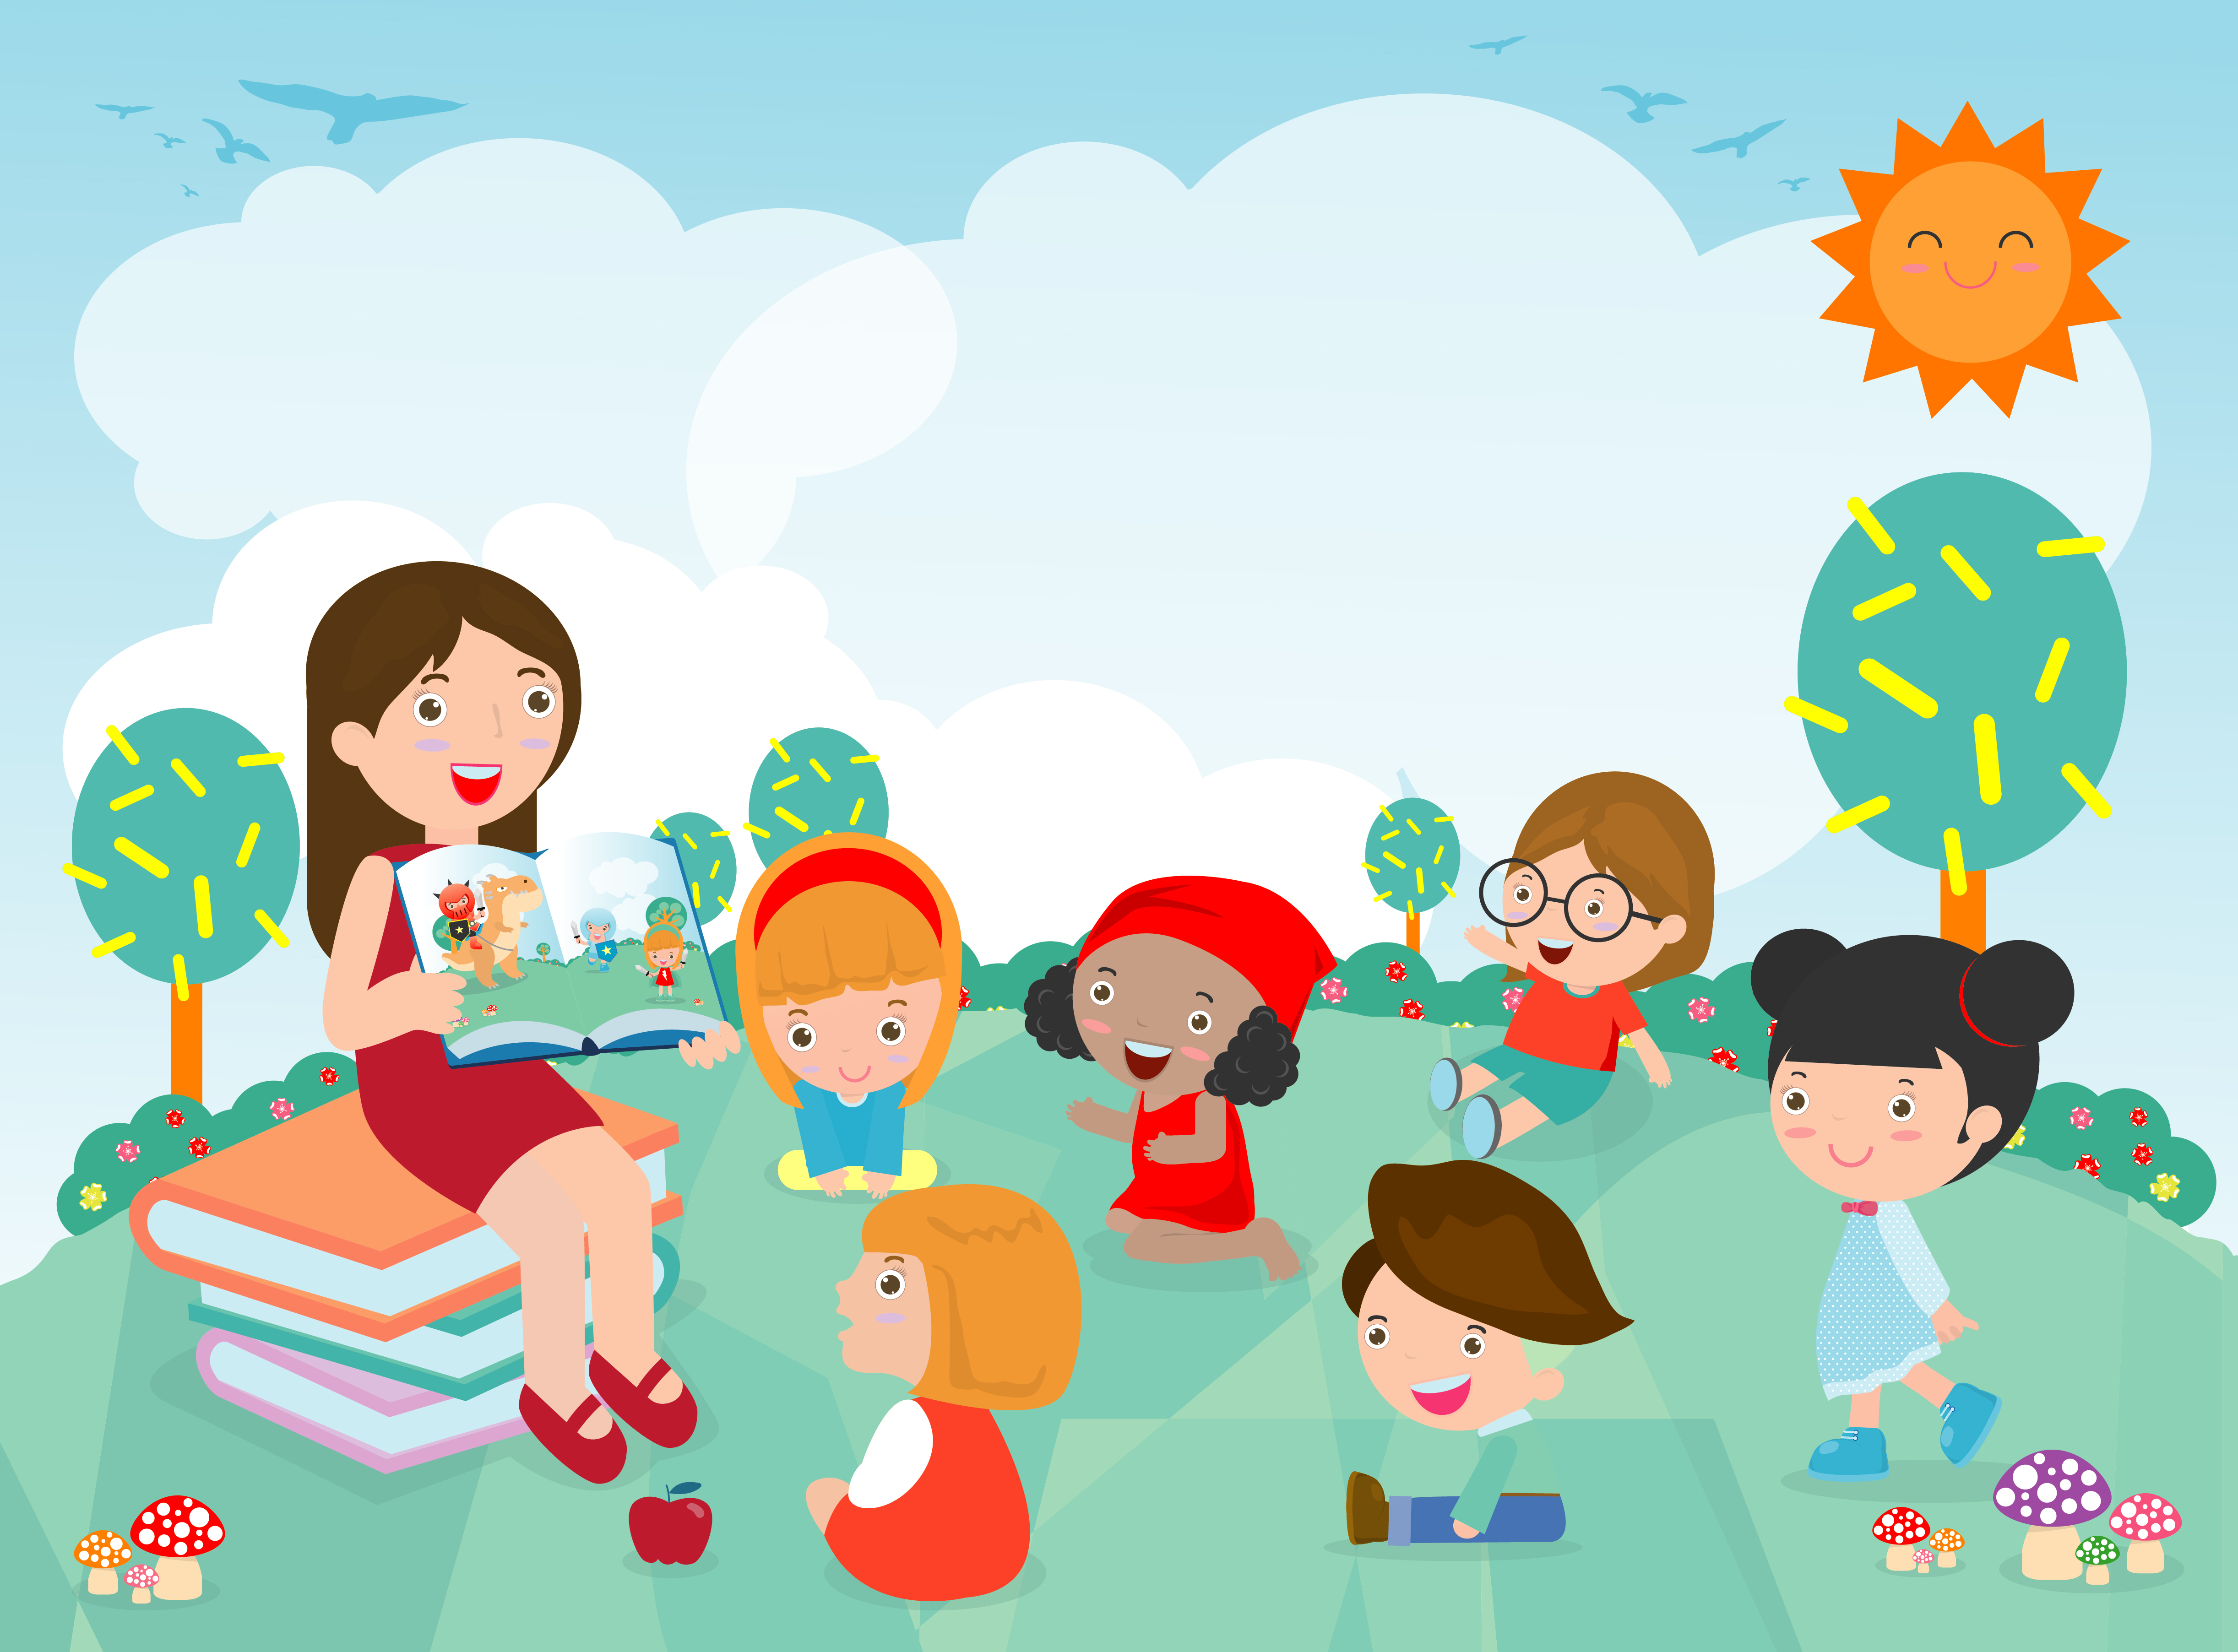 Illustration of a light-skinned person with brown hair reading a book in the grass to a small group of children